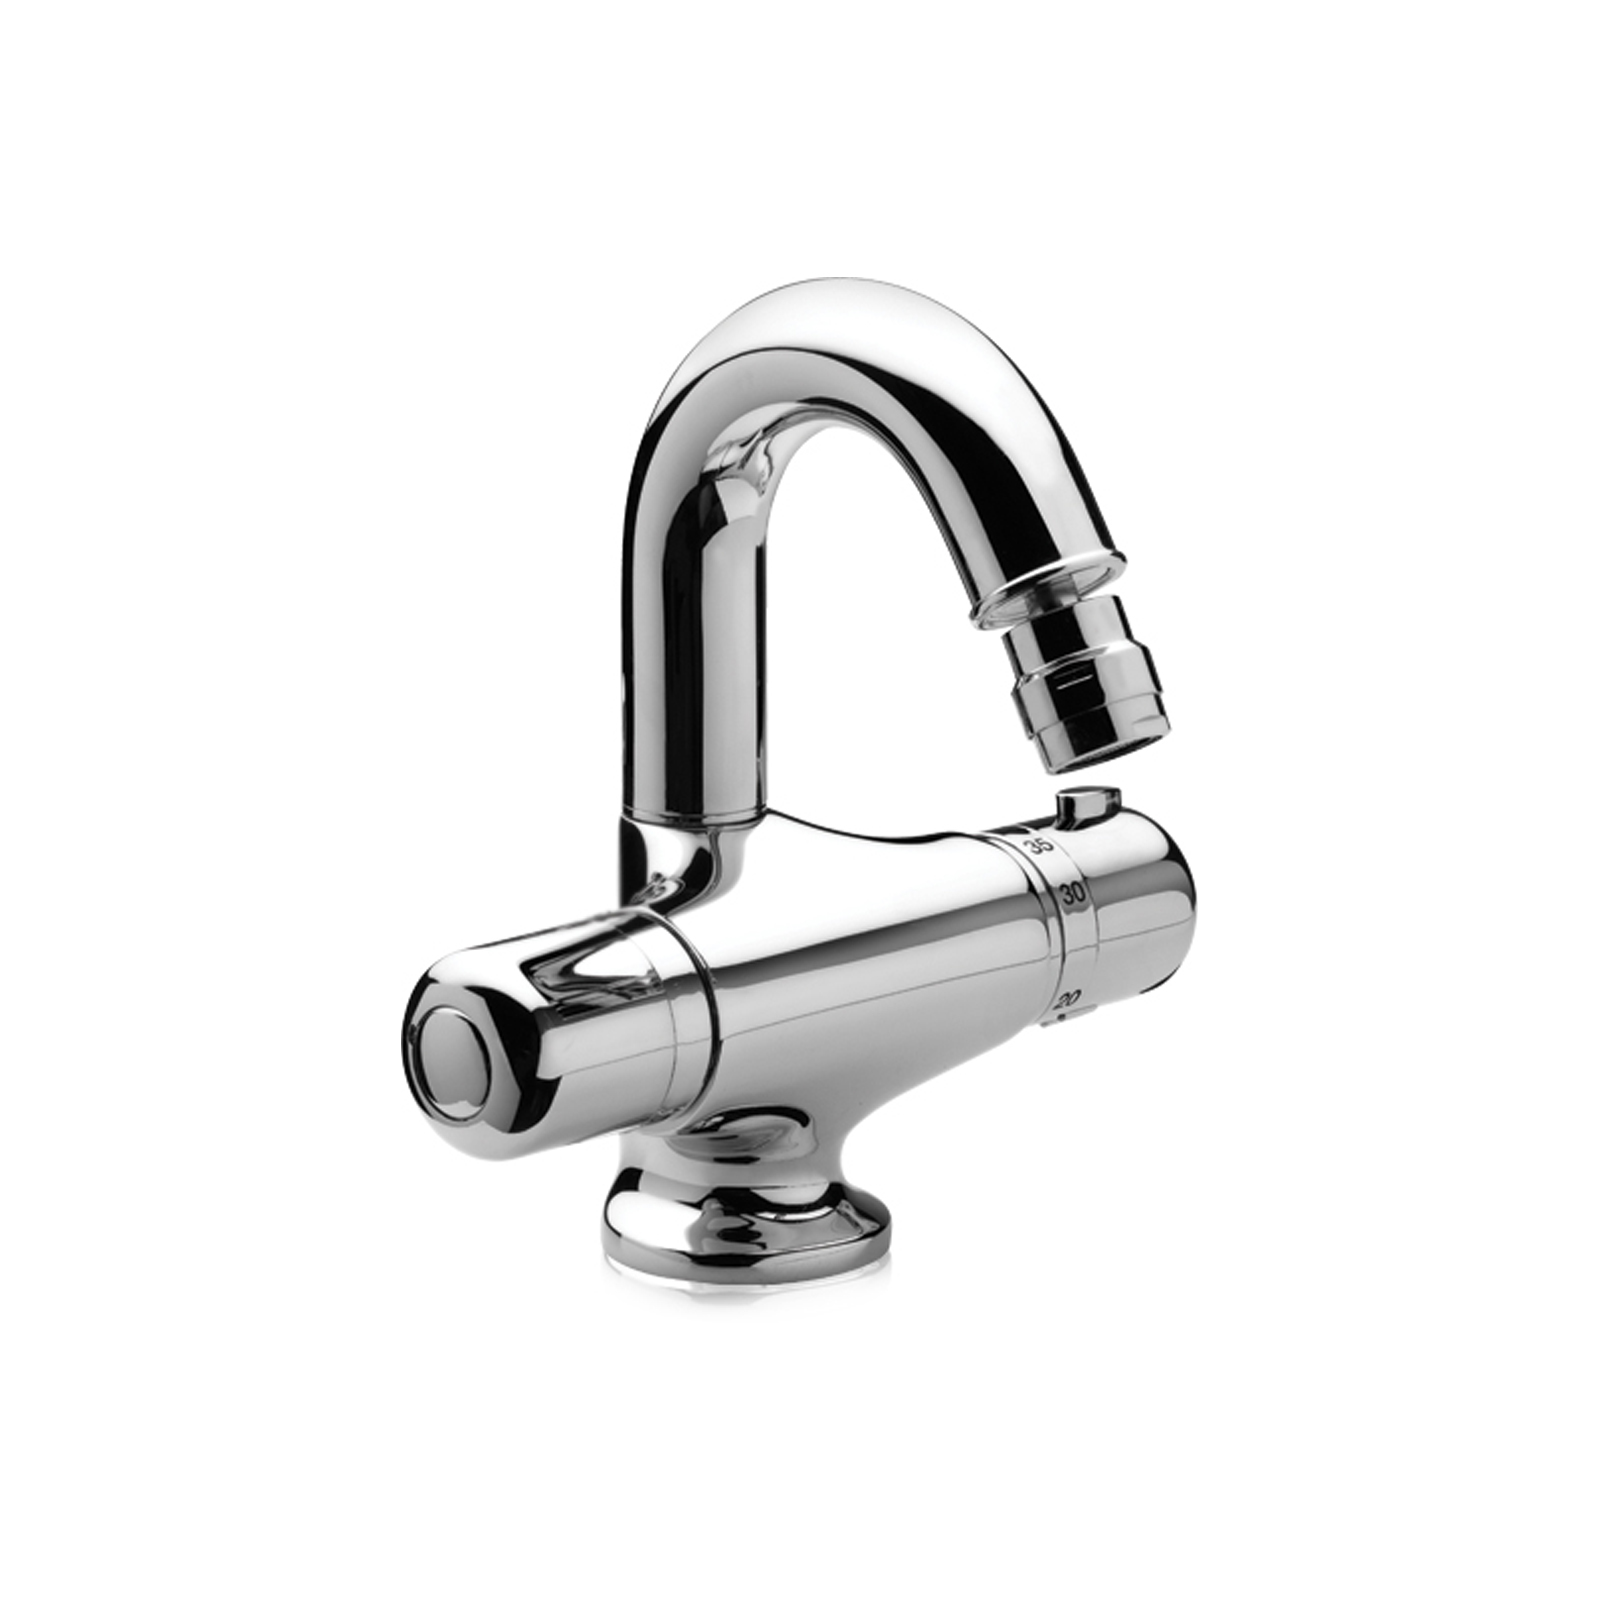 Thermostatic bidet mixer with swivel spout